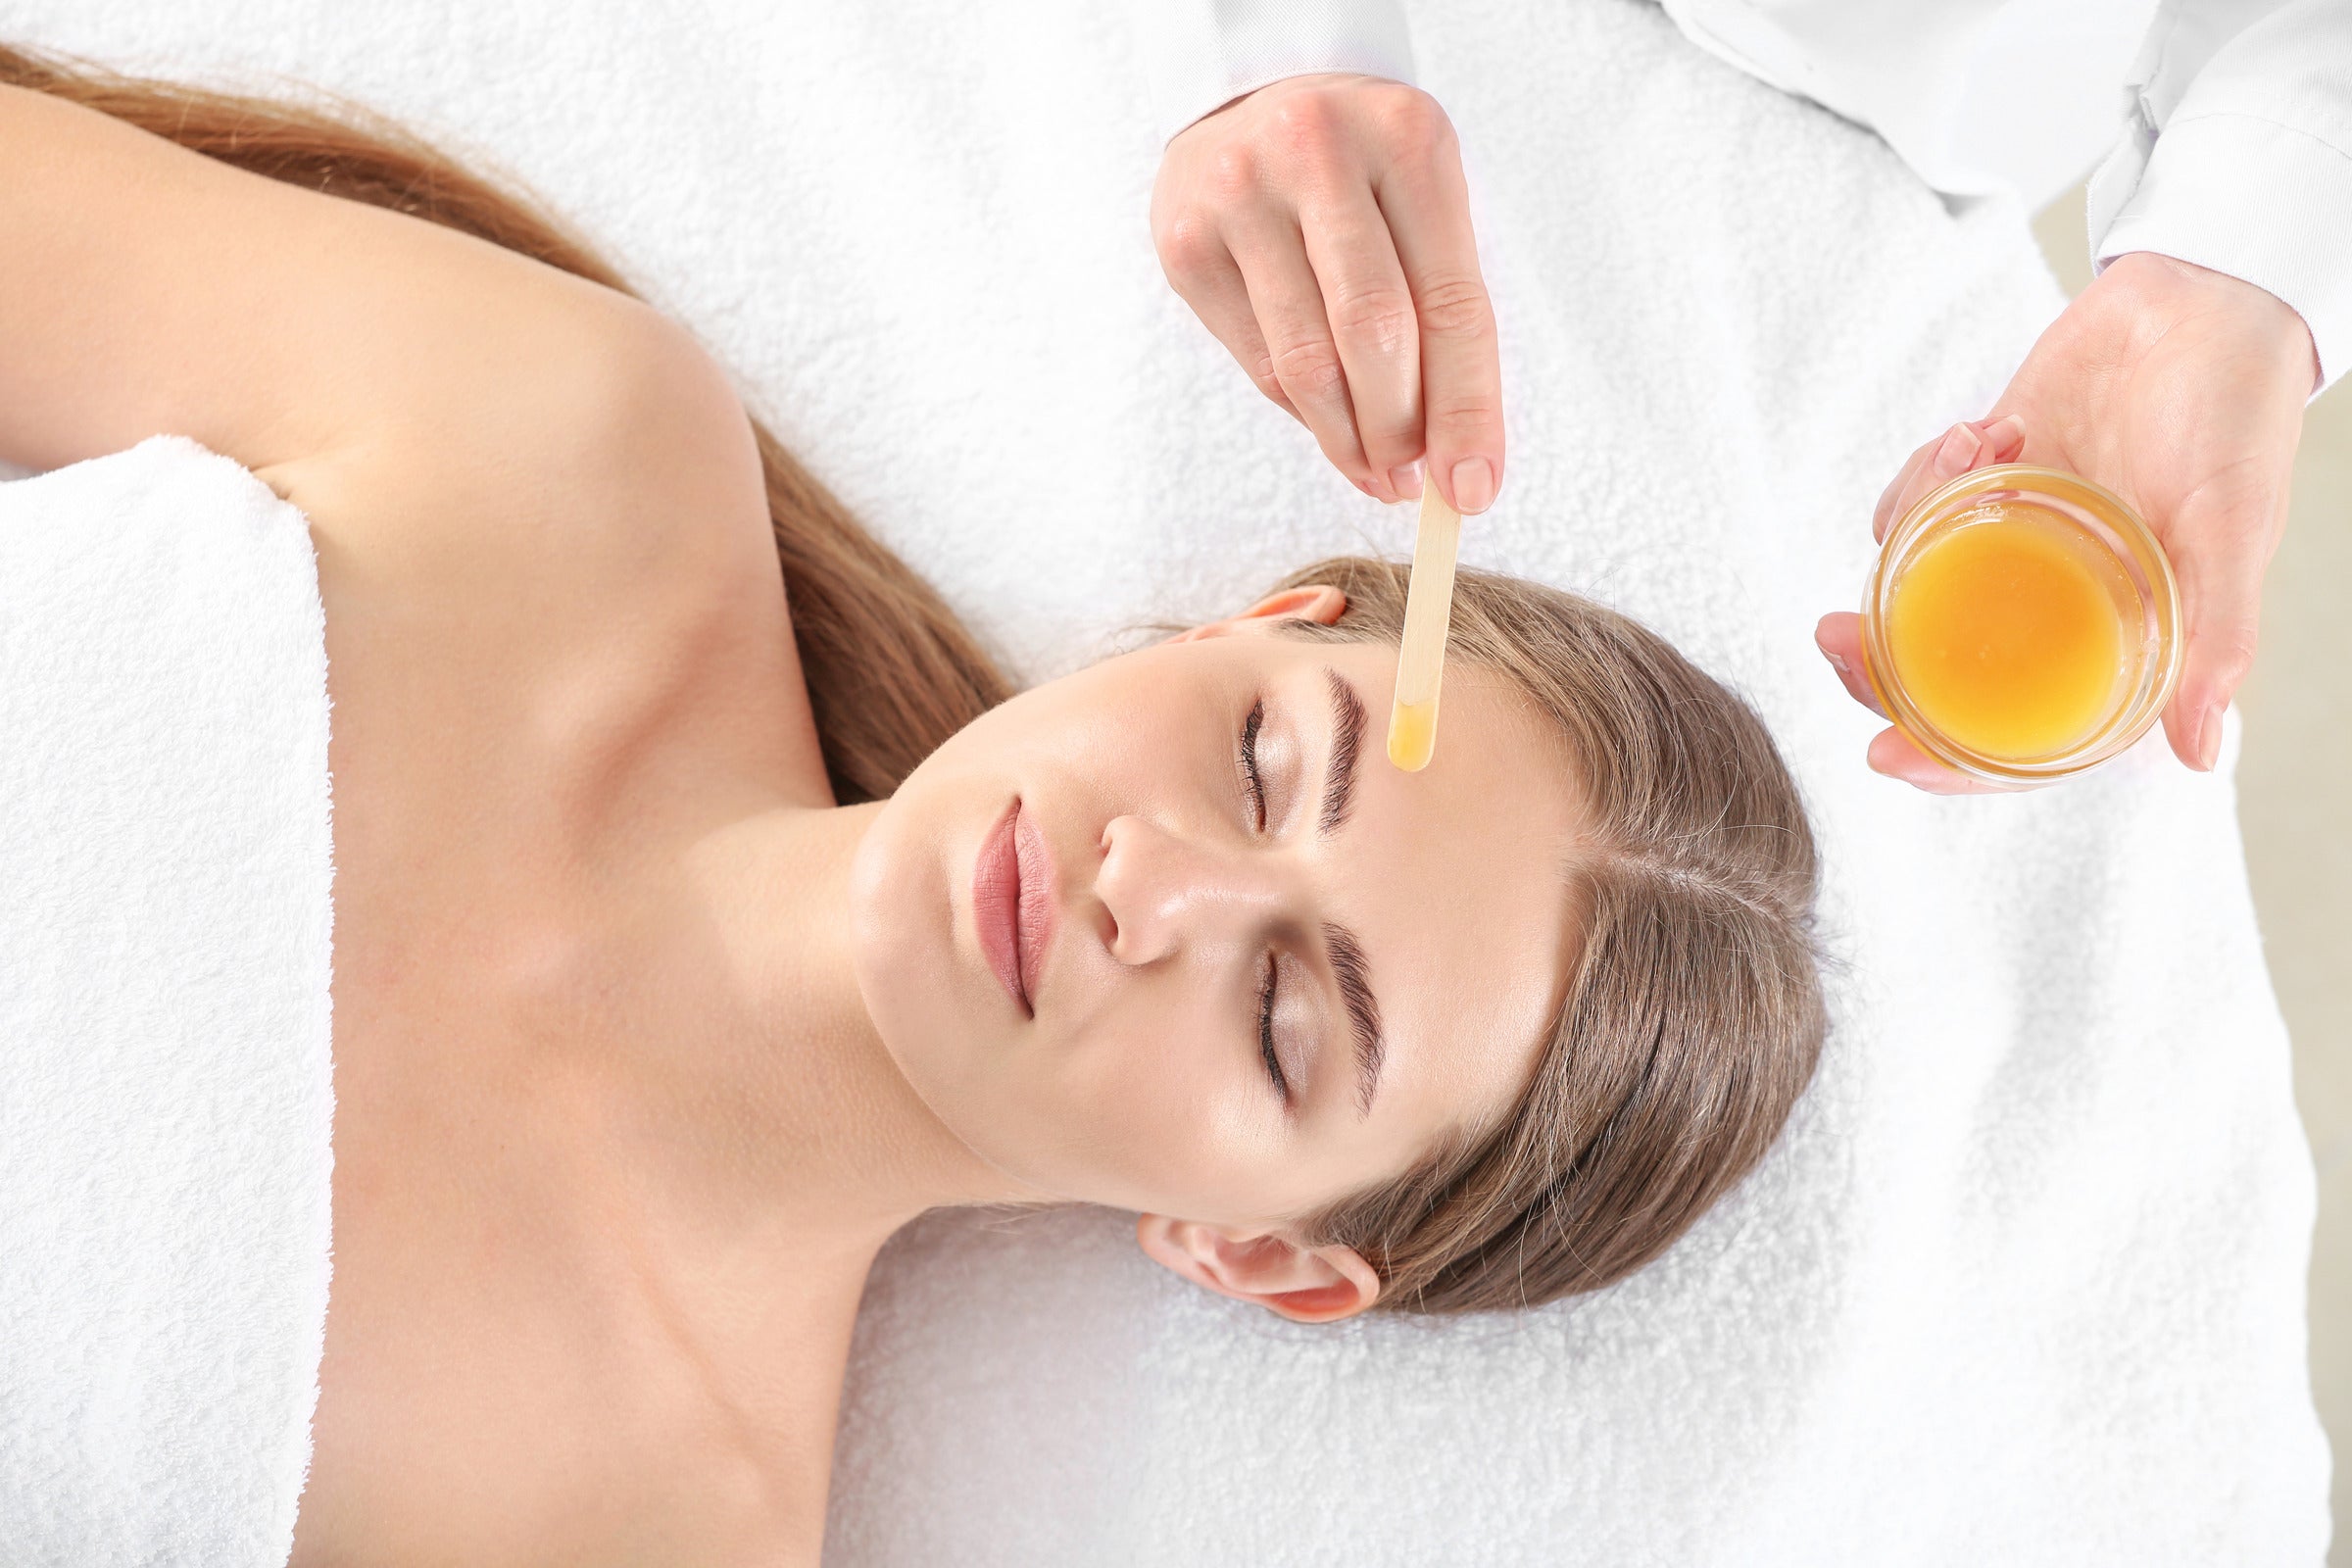 6 Tips for Fast Recovery After Waxing Eyebrows